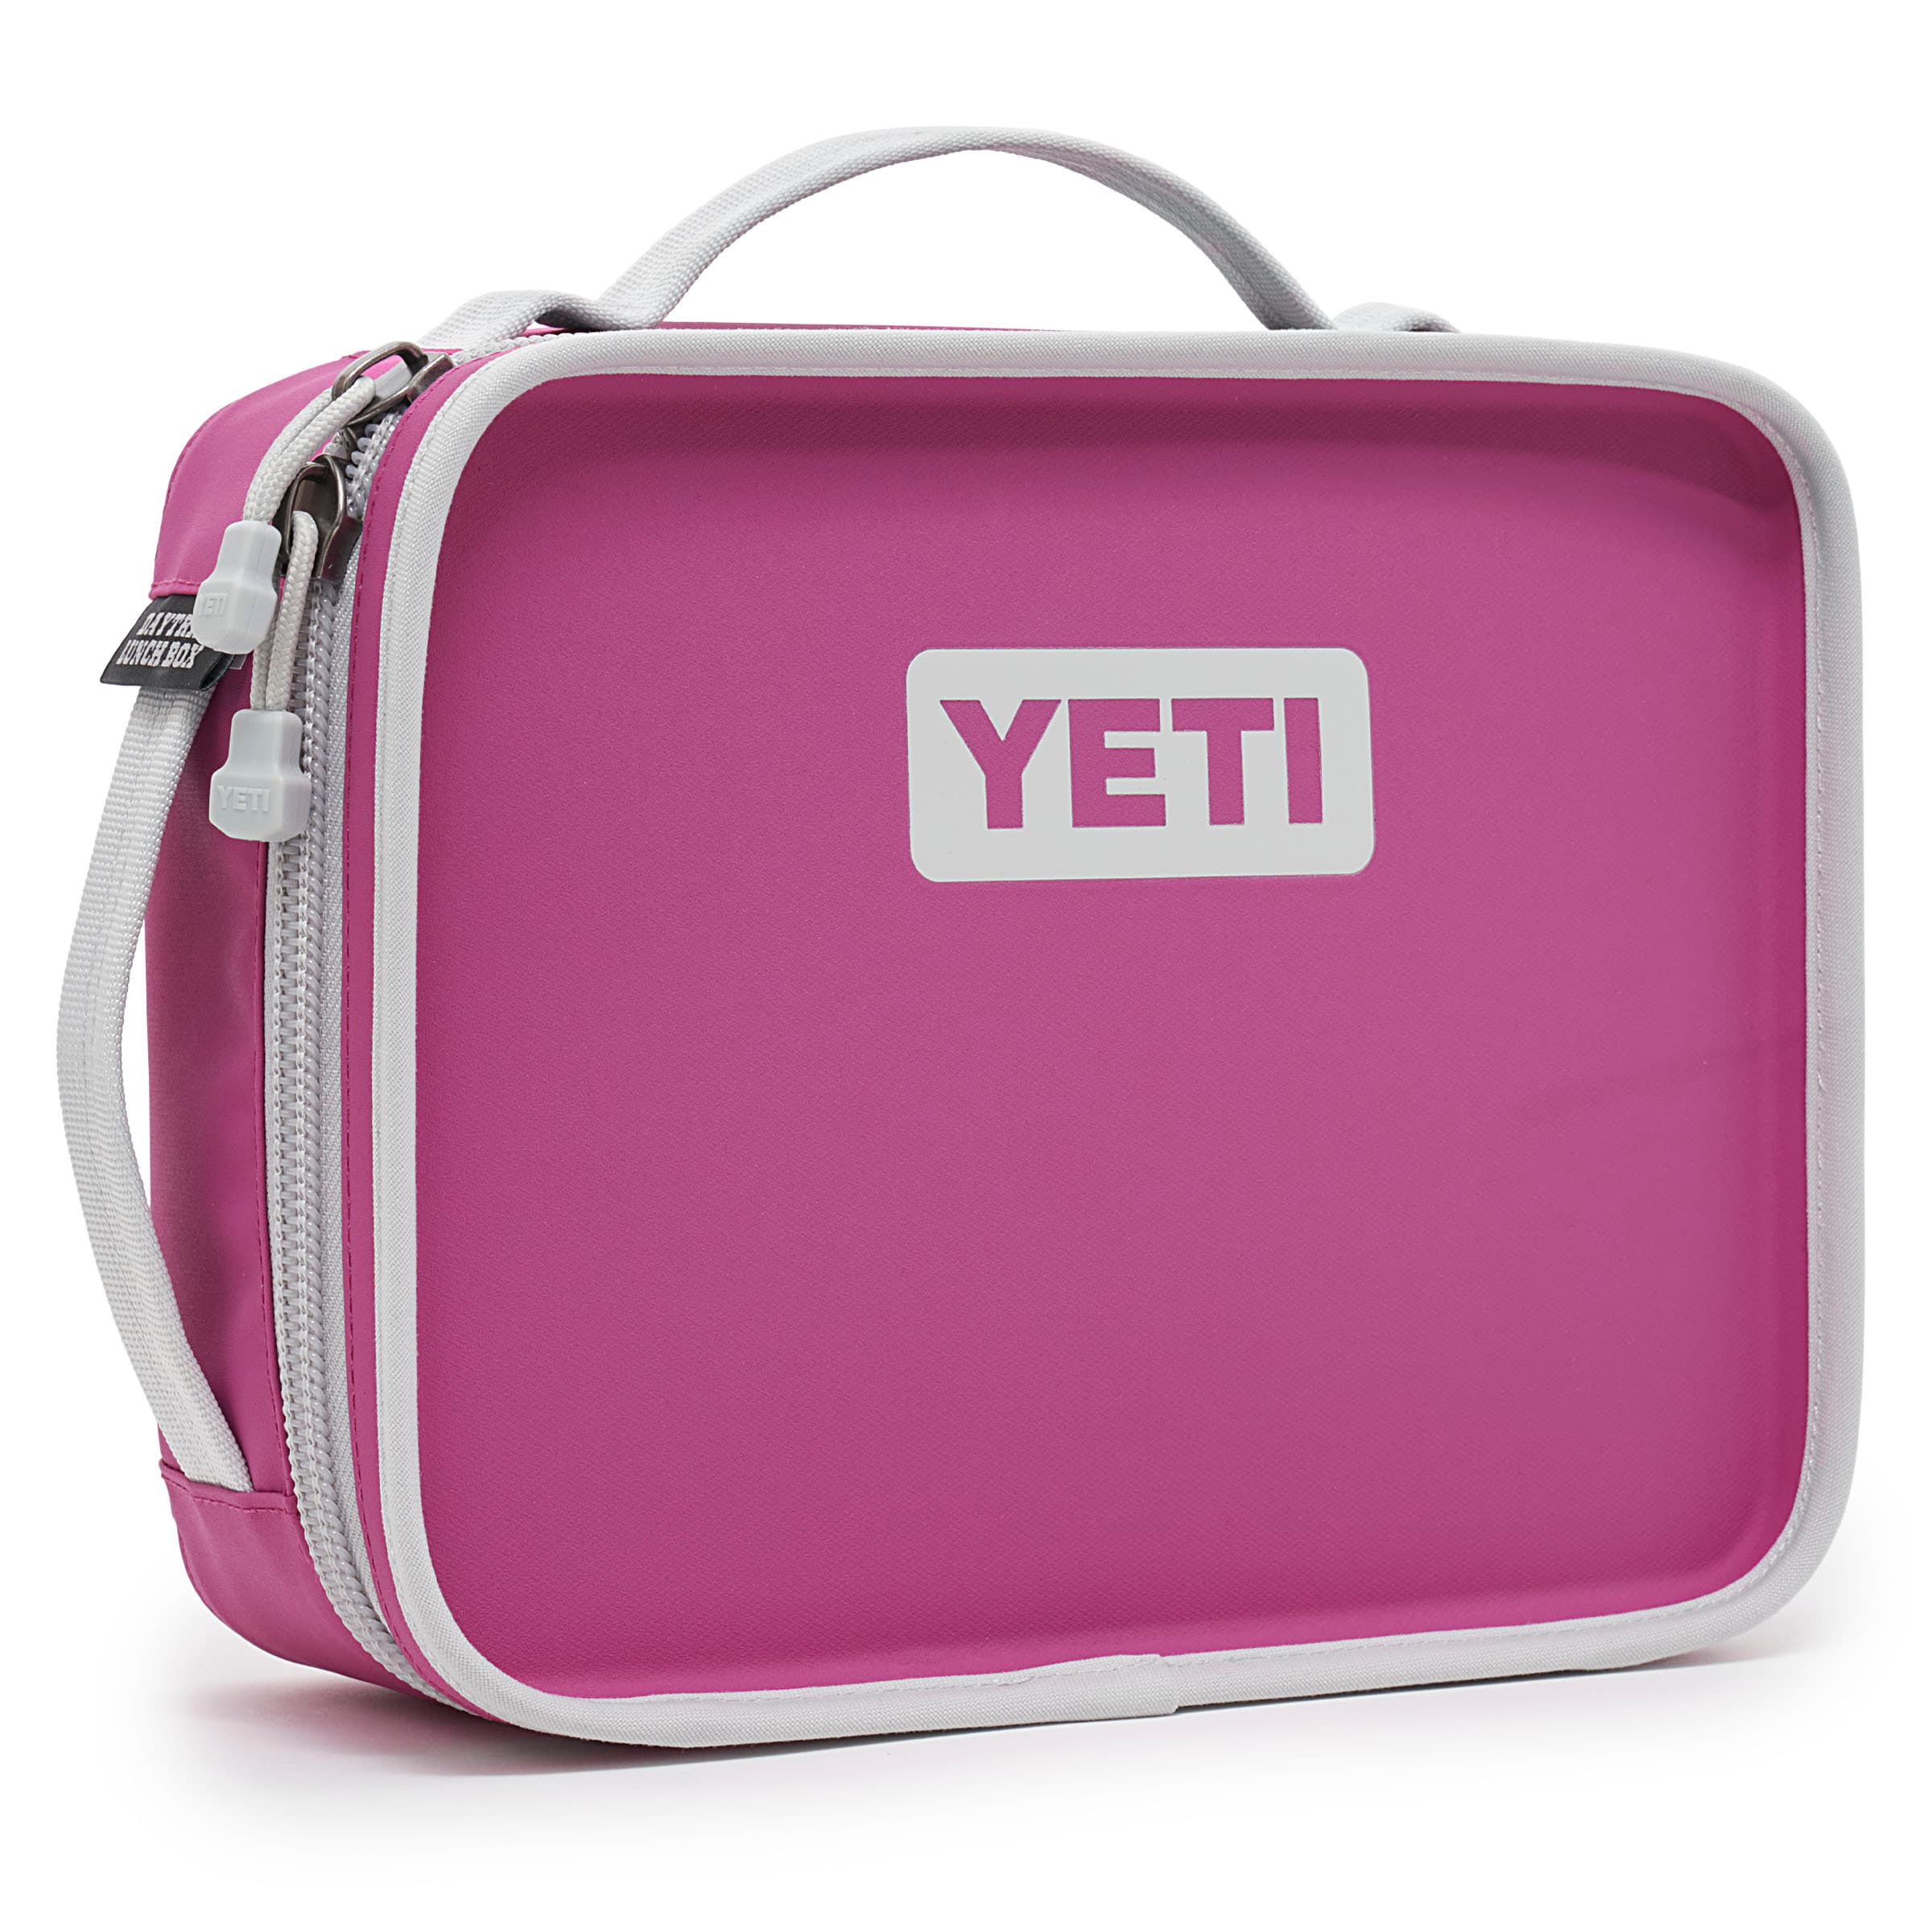 BEST in sales YETI DAYTRIP LUNCH BAG - PRICKLY PEAR PINK YETI Coolers; made  by Just Another Fisherman Sales